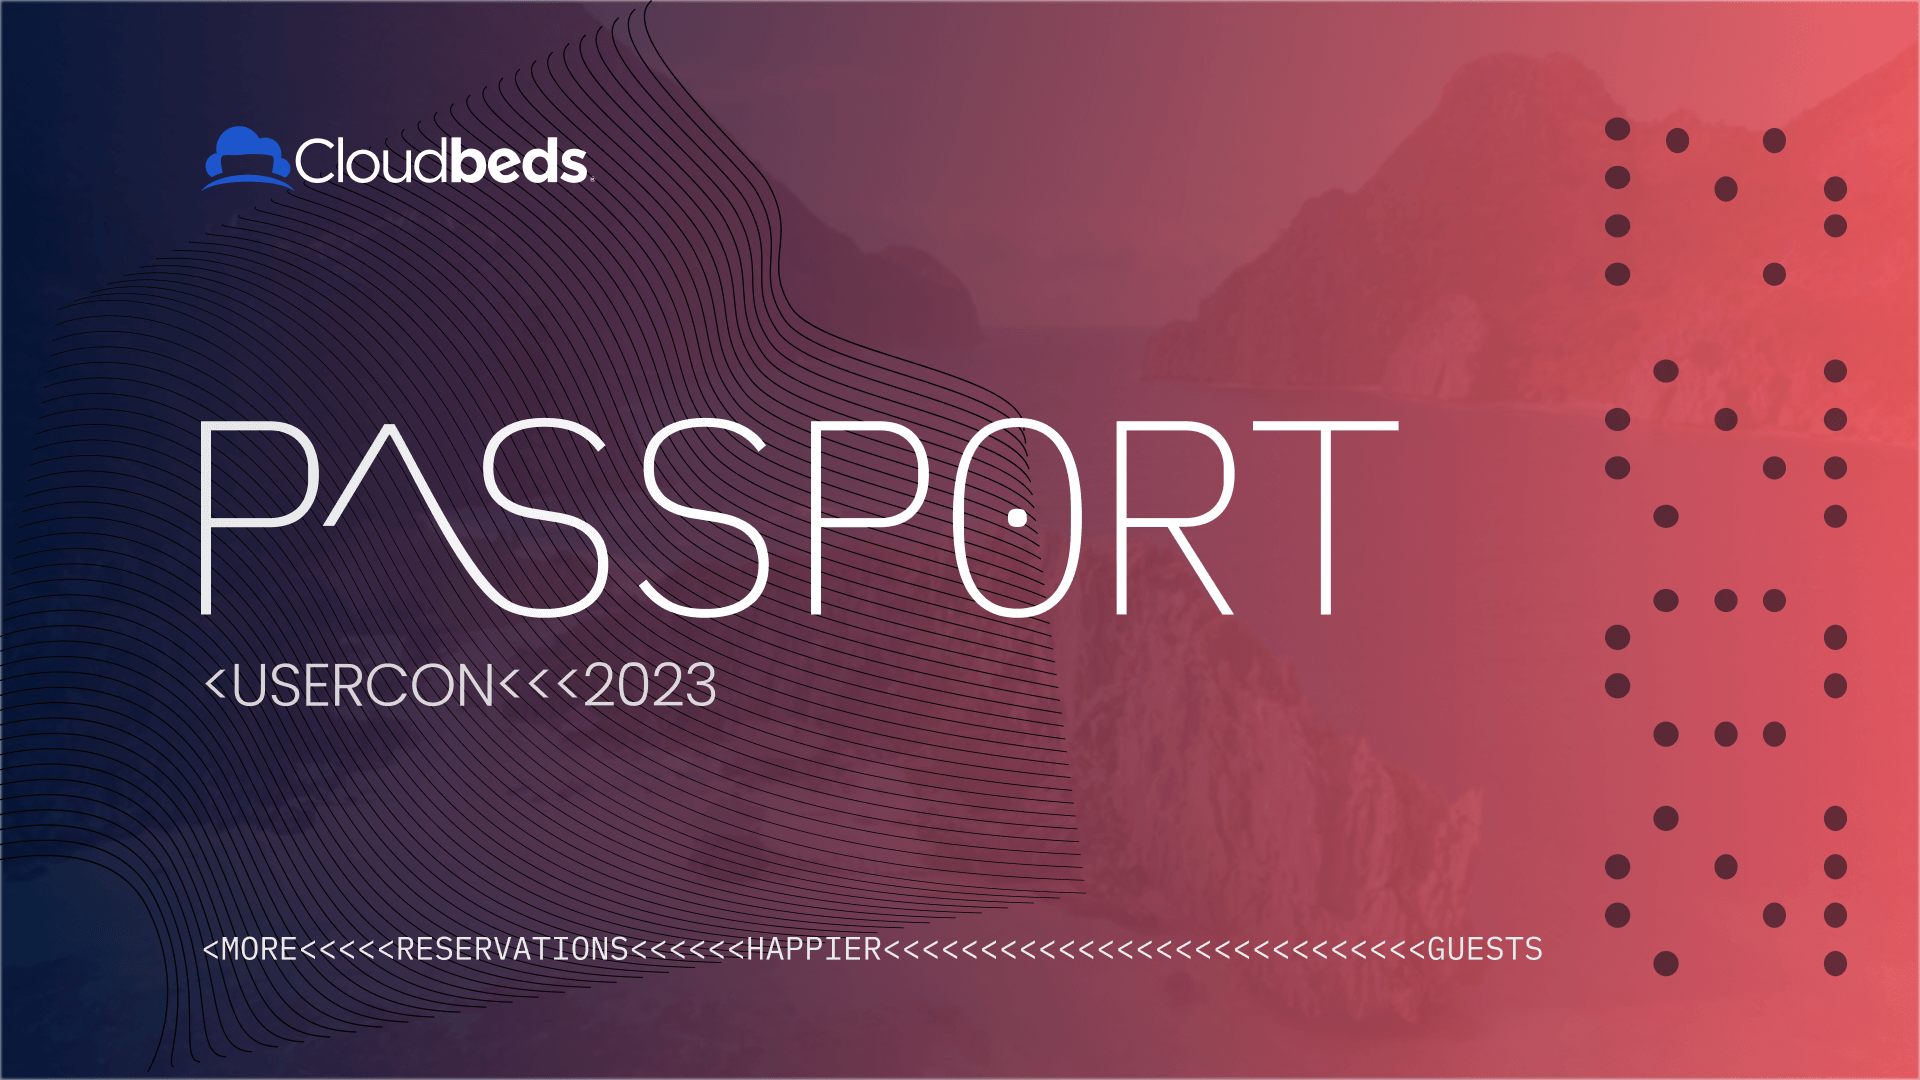 Cloudbeds PMS 2023 UserCon Passport Conference